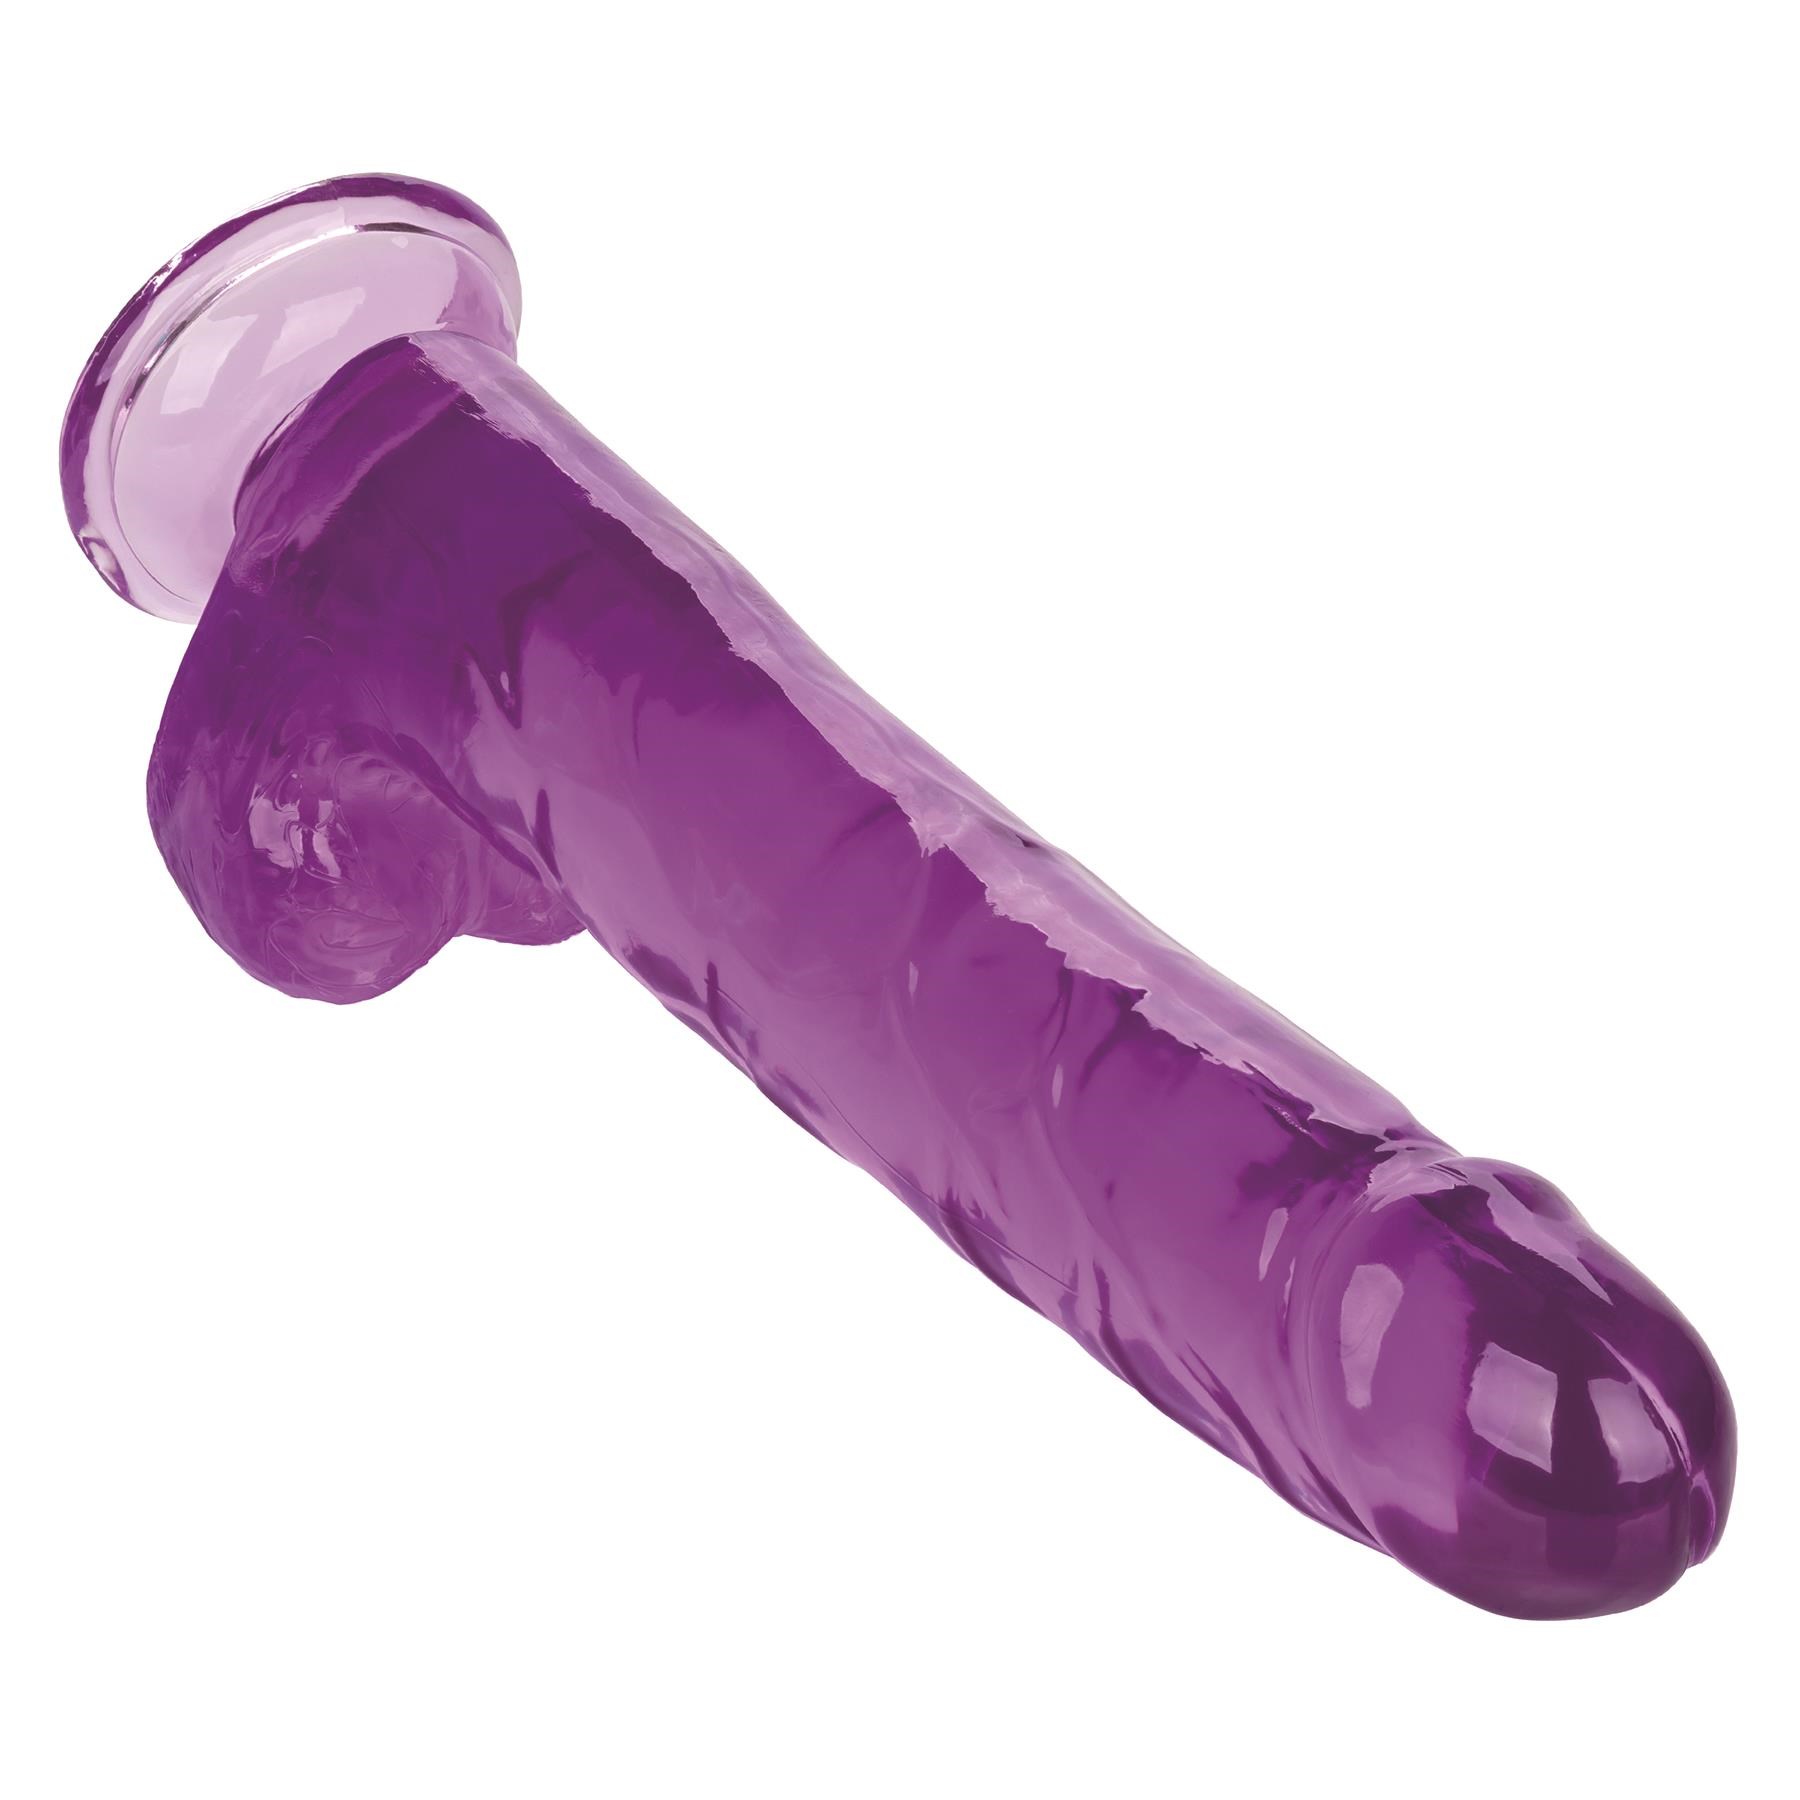 Size Queen 10 Inch Dildo Tip Pointing Downward - Purple